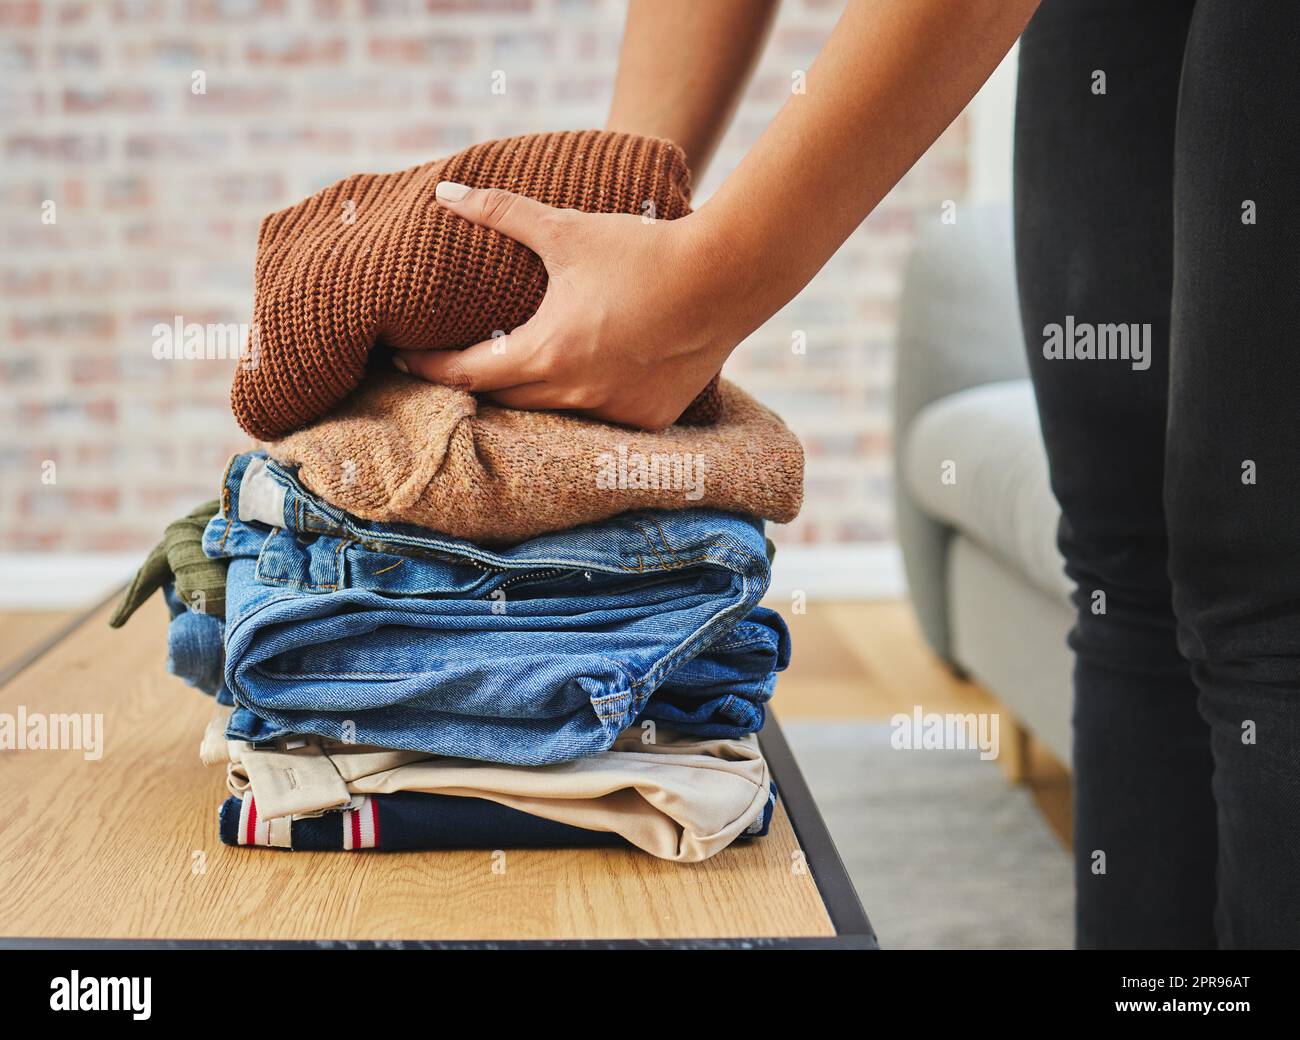 Keeping my closet clean and neat. a woman folding a load of laundry. Stock Photo